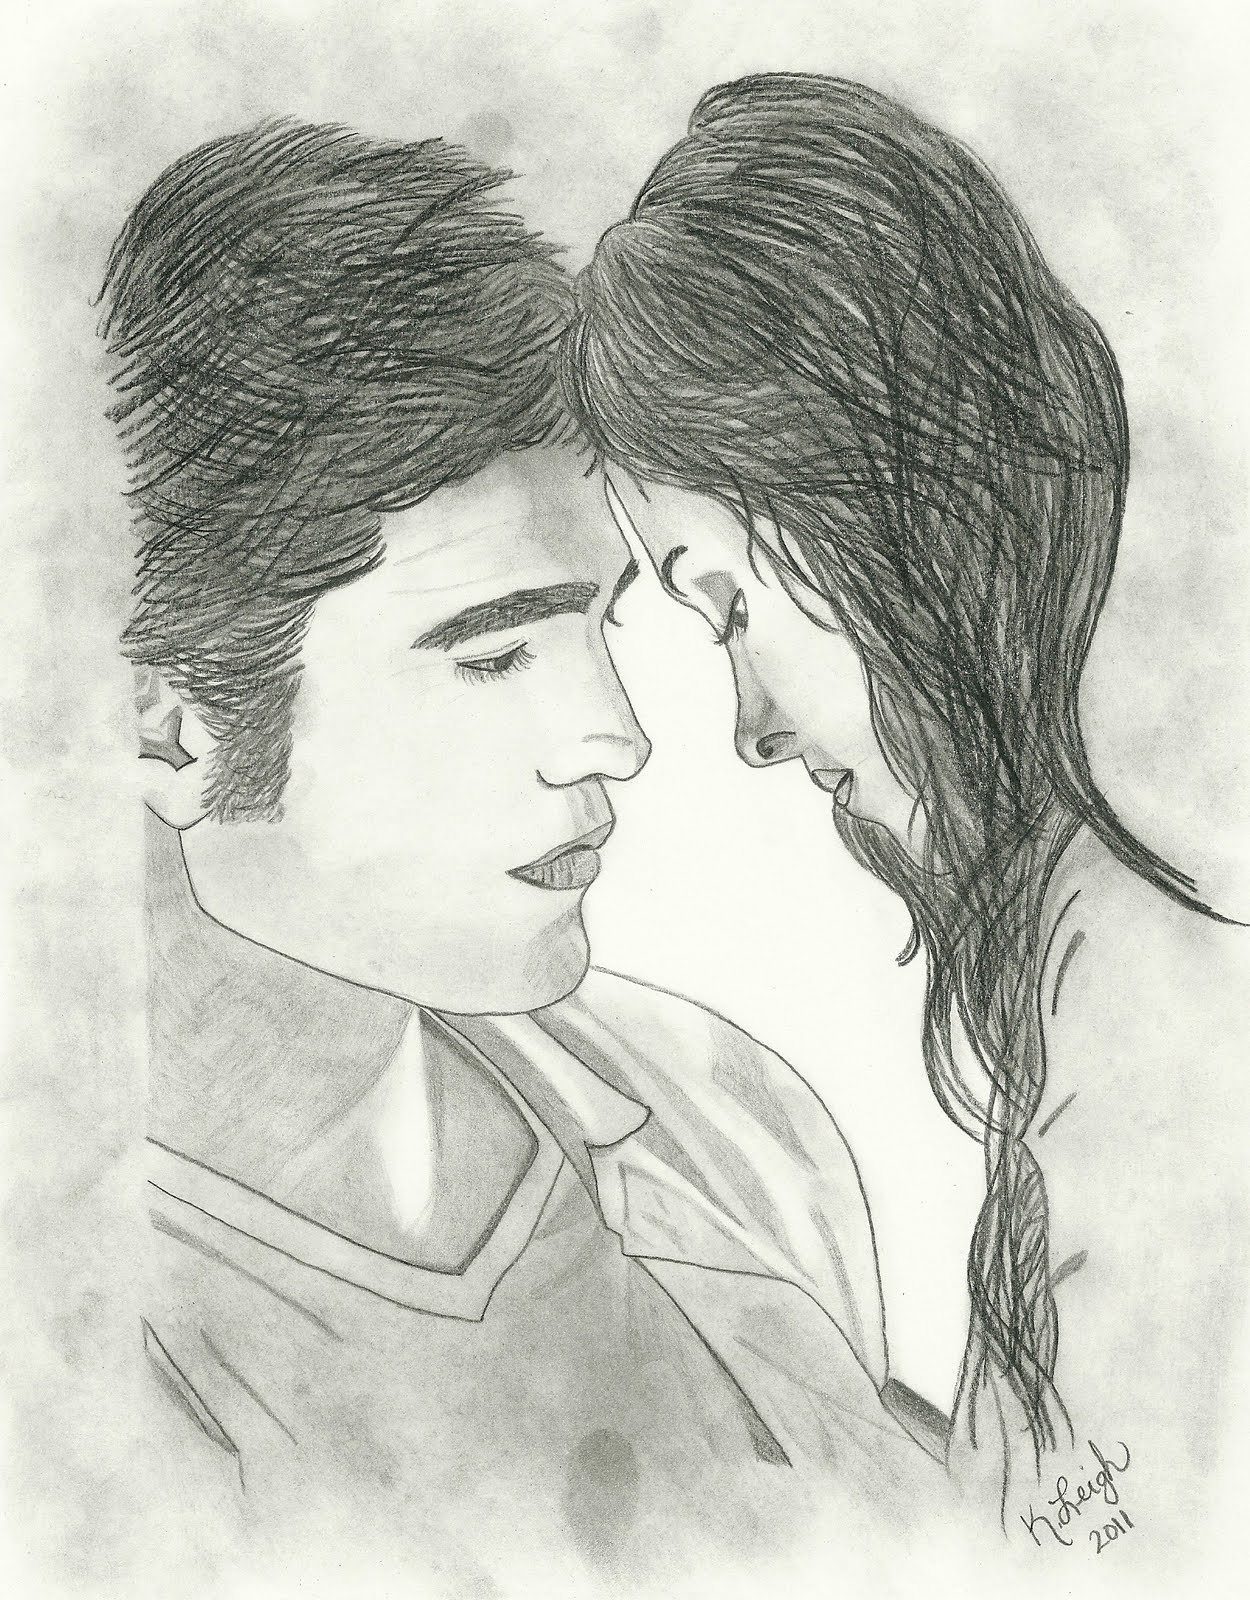 In These Small Moments: Twilight Saga Drawings